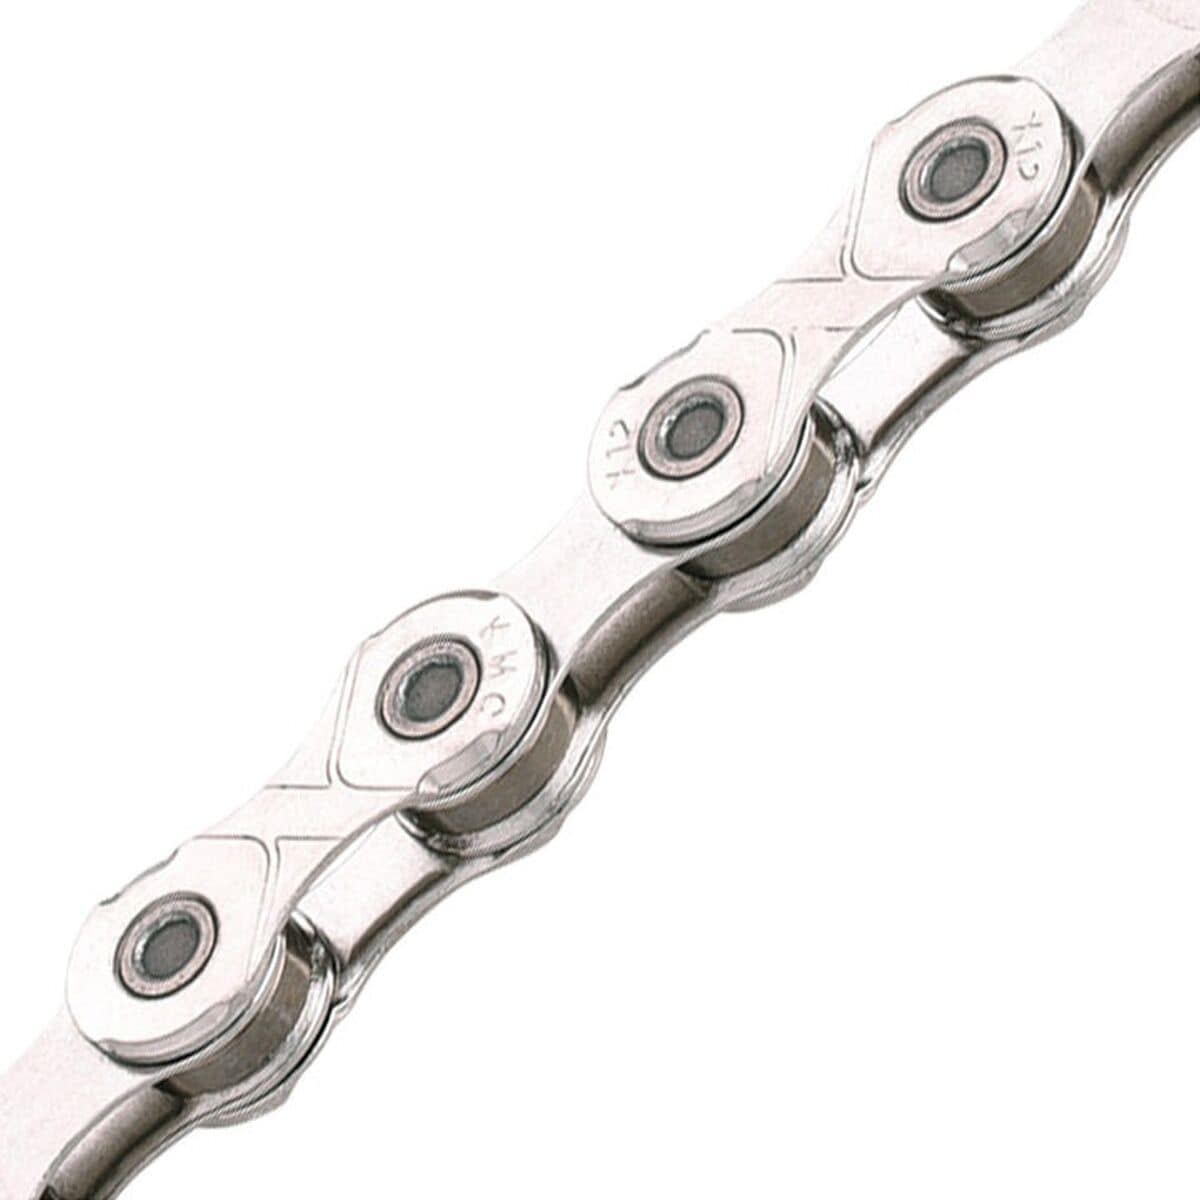 KMC X-12 Chain - 12-Speed Silver, 12-Speed, 126-Link